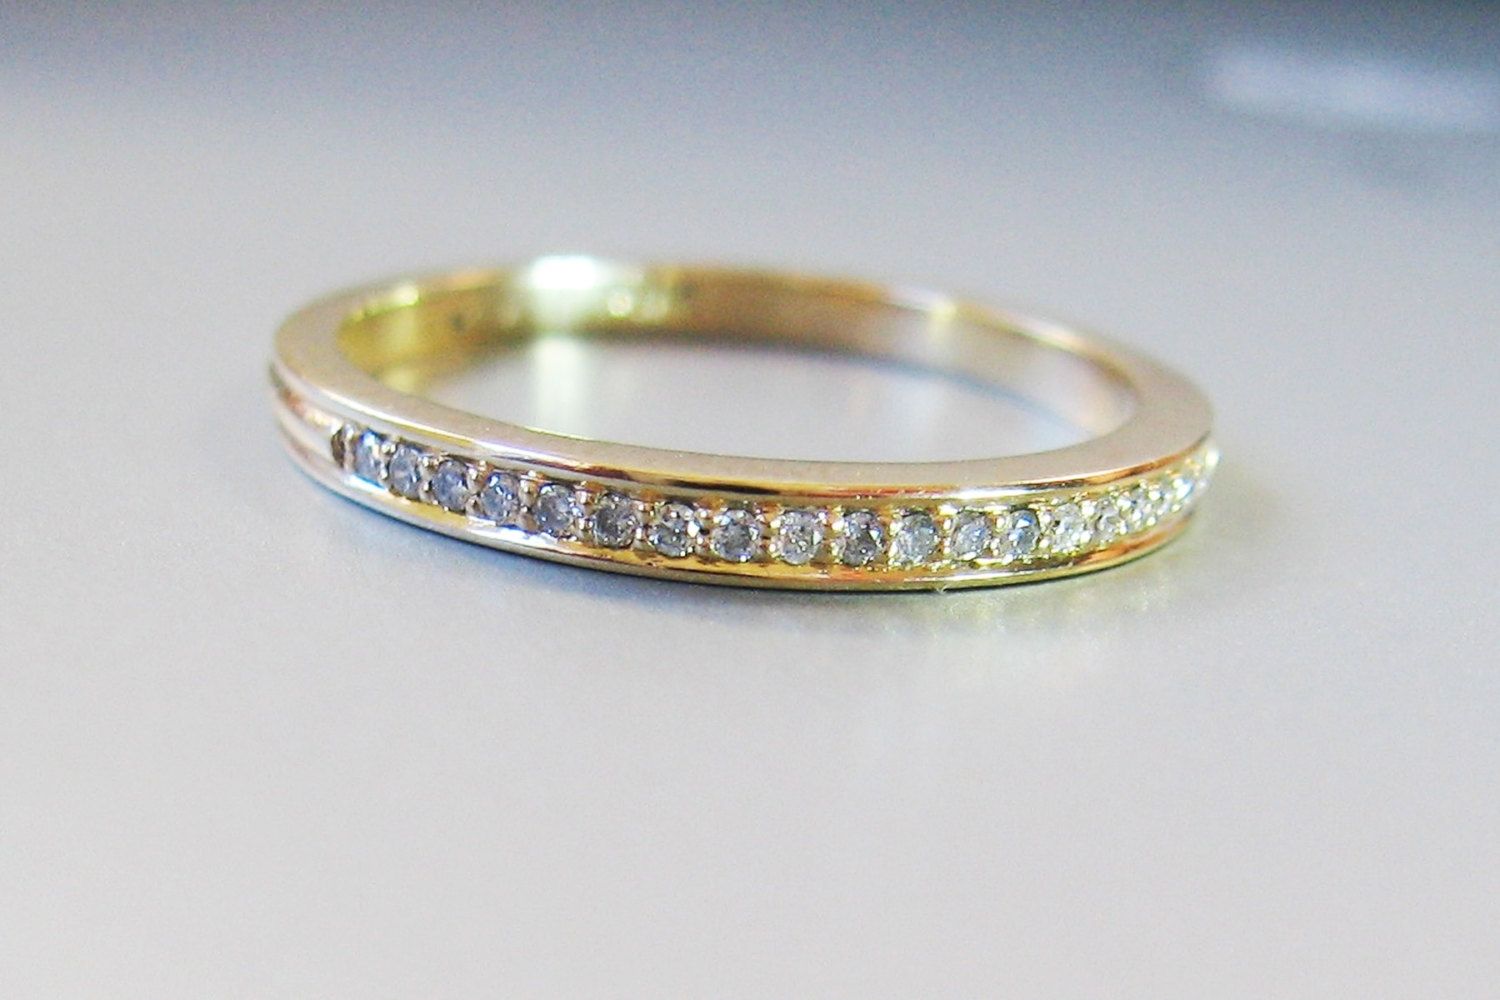 Micro Pave Diamond Eternity Ring 2mm In 14k Gold, Handmade Diamond With Regard To Best And Newest Diamond Eternity Wedding Bands In 14k Gold (View 7 of 15)